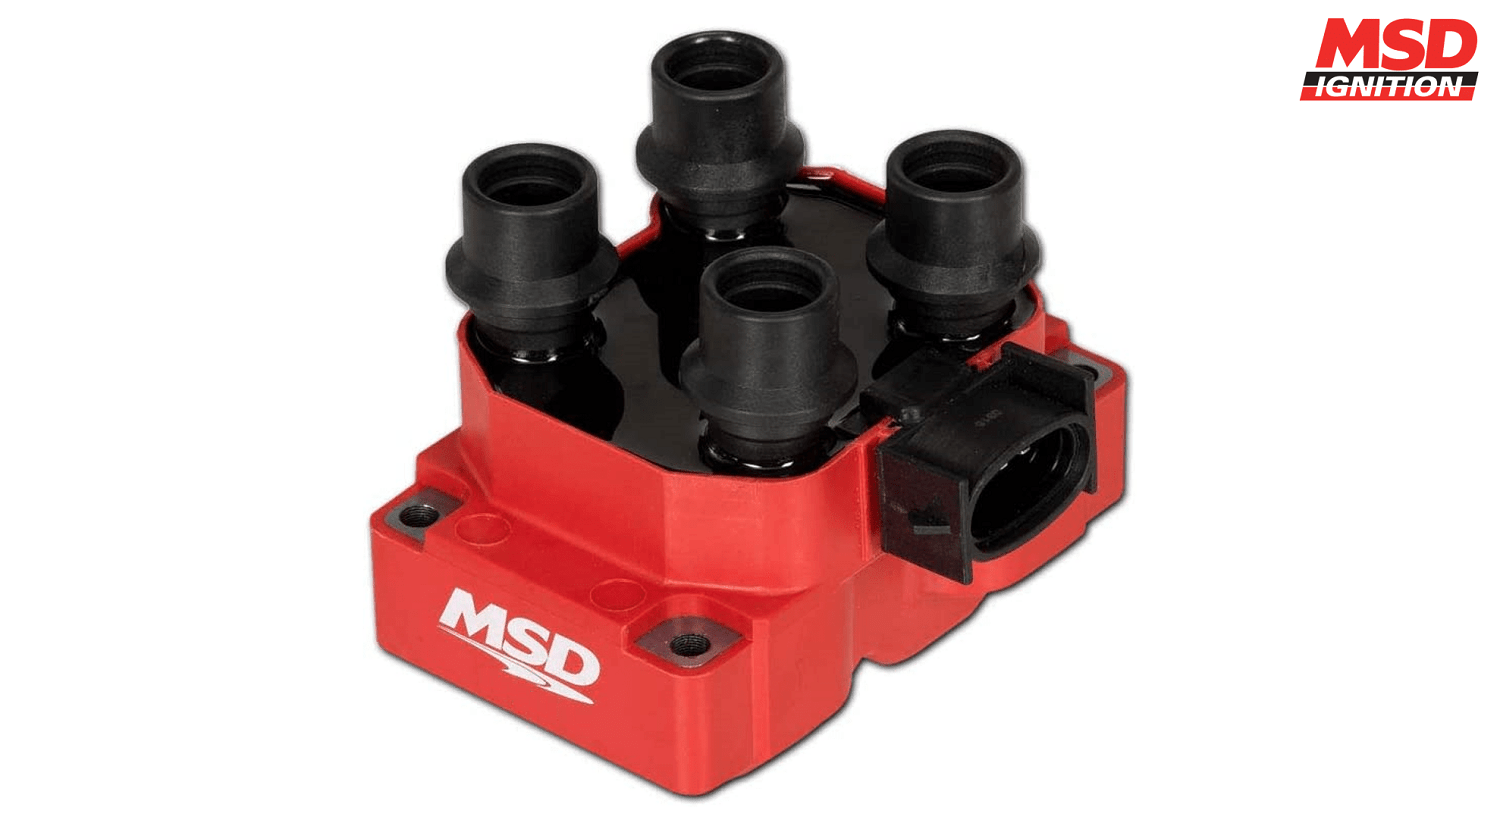 Find the best auto part for your vehicle: MSD DIS 4 Tower Ignition Coil Is Designed As A Replacement Over The Stock Coil And Produces A High-Voltage Spark.